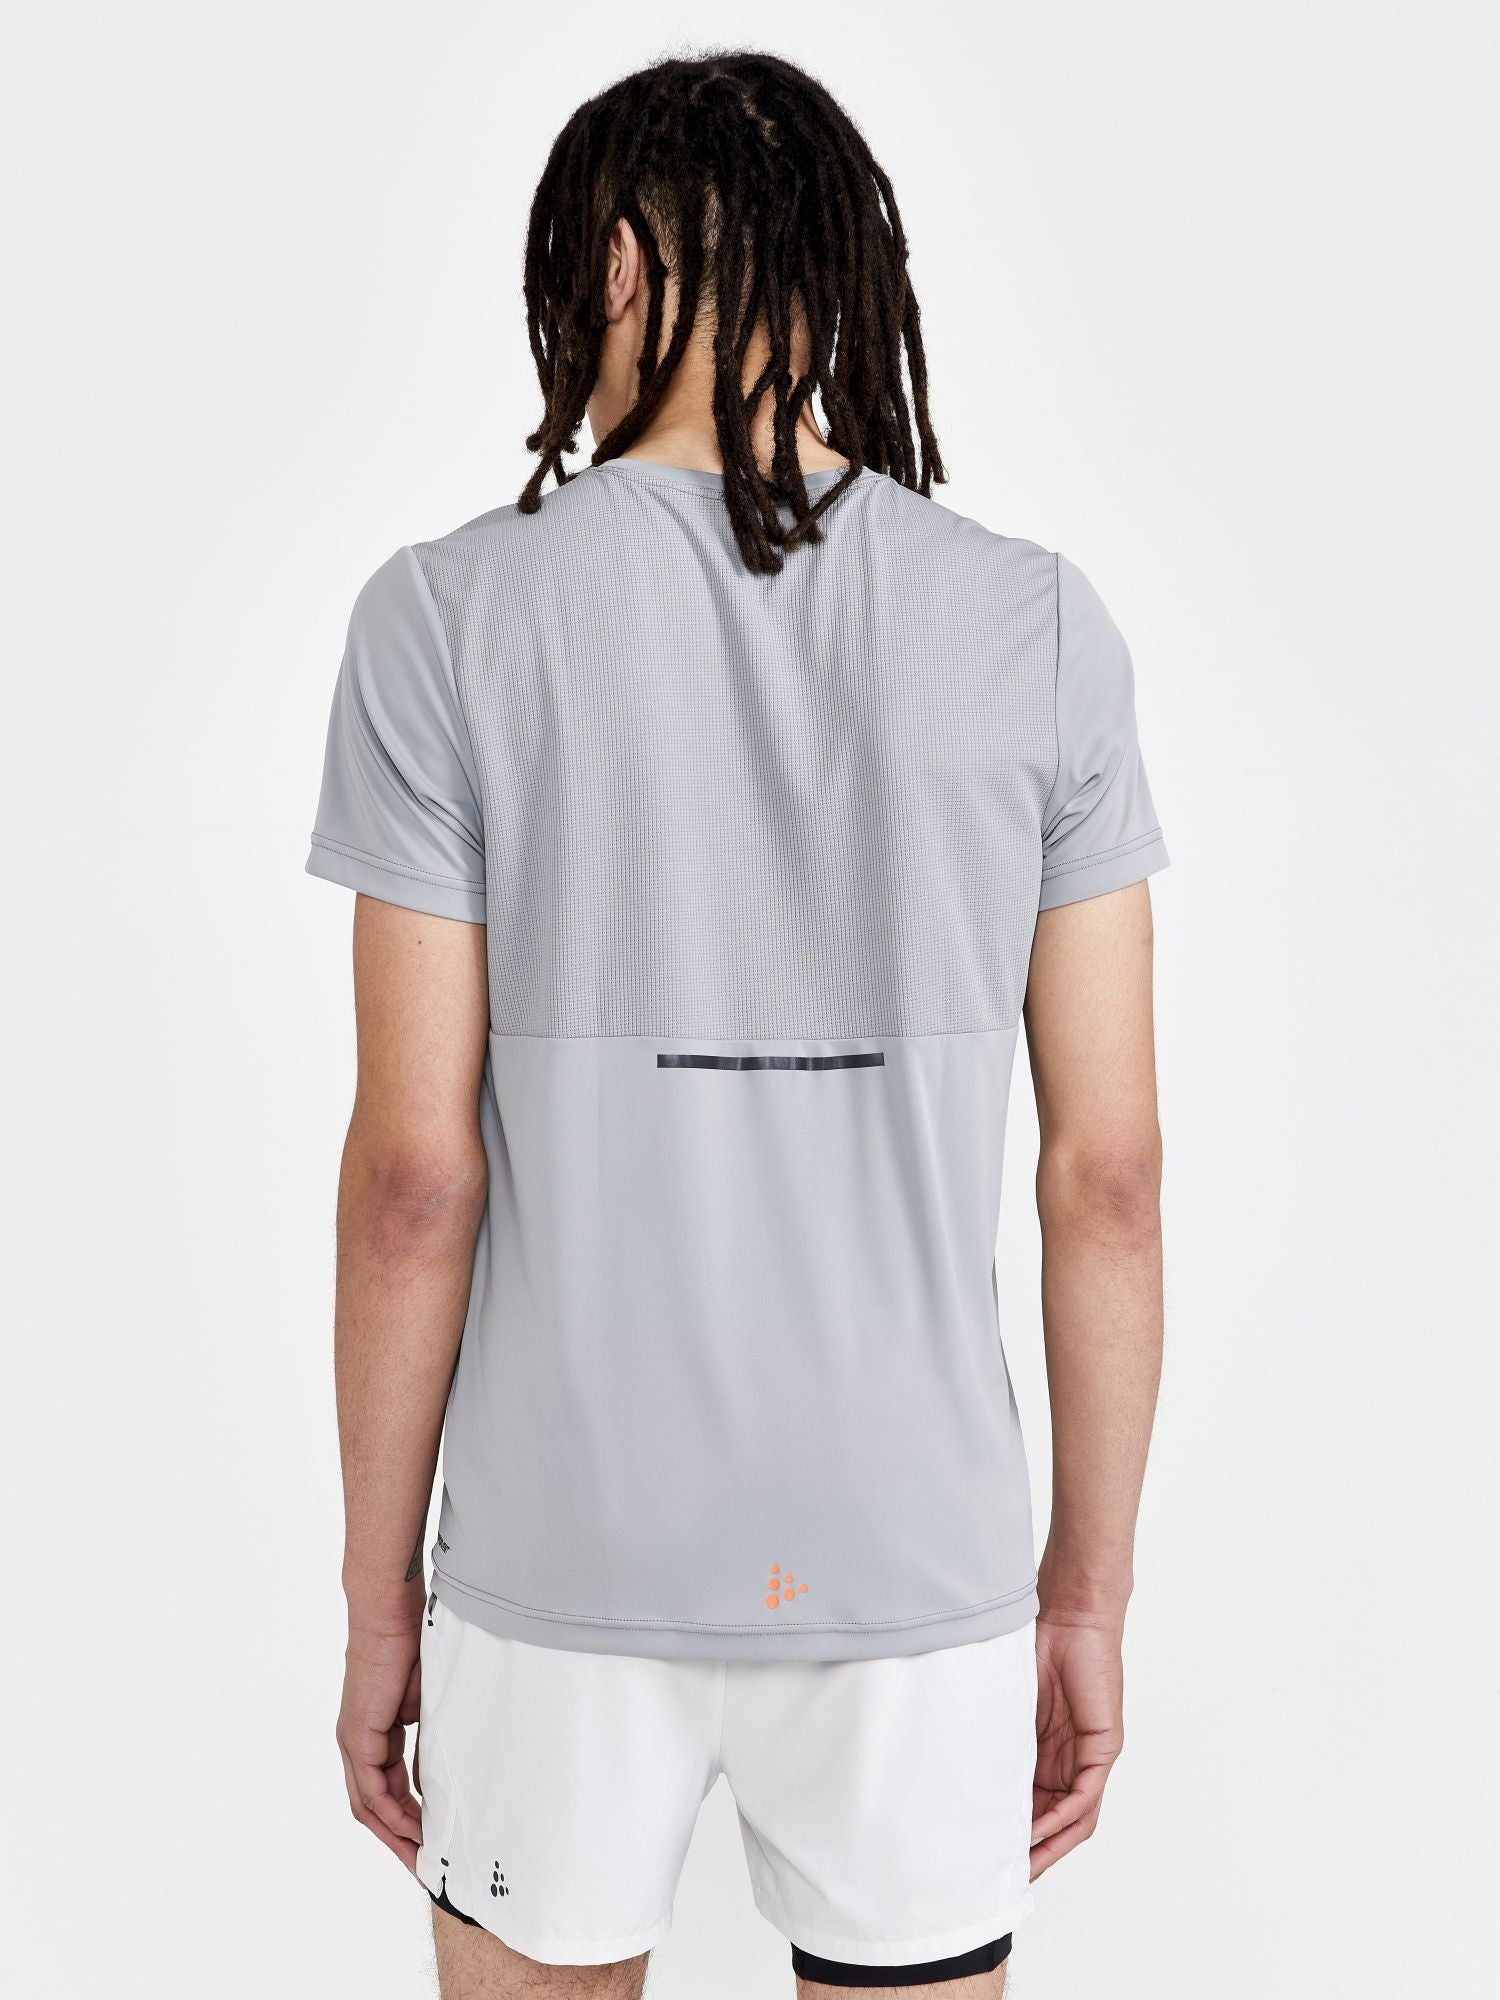 MEN'S - CORE CHARGE SS TEE